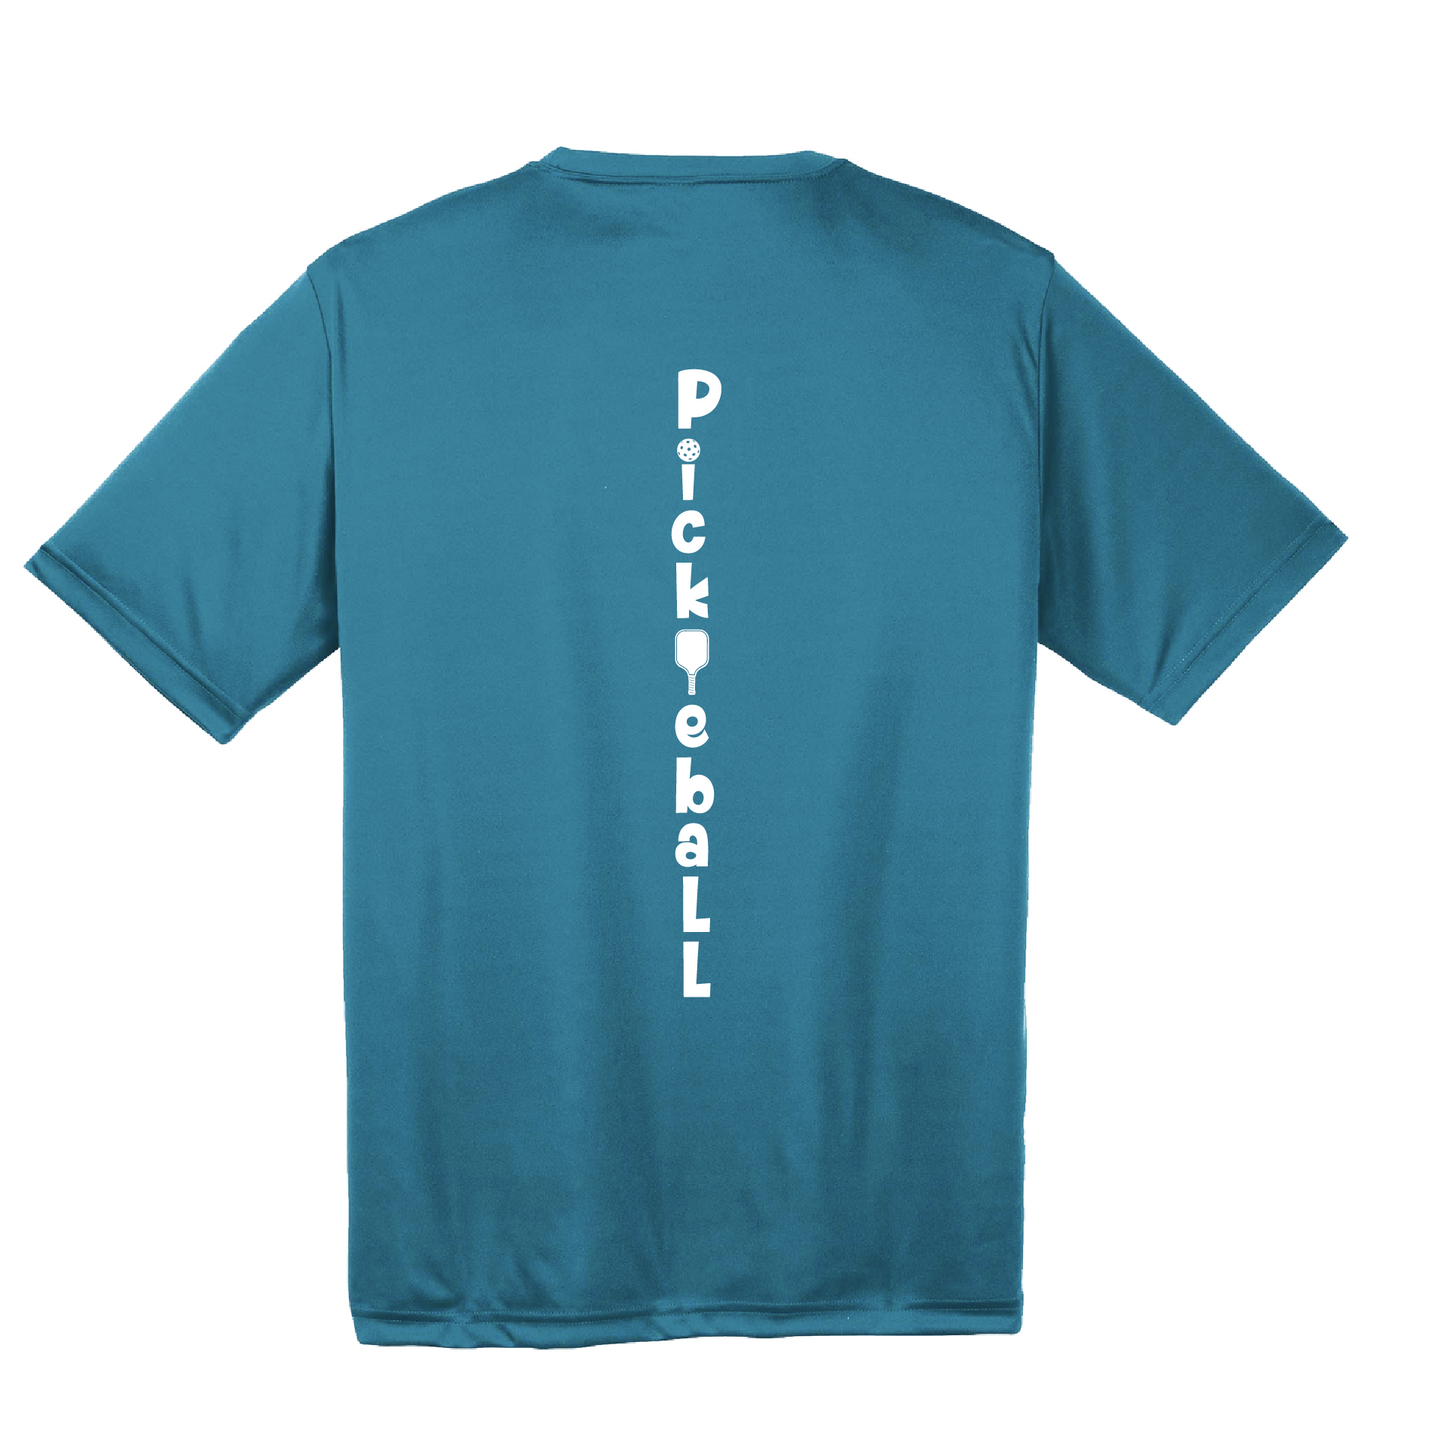 Pickleball Design: Pickleball Vertical Customizable Location  Men's Styles: Short Sleeve (SS)  Shirts are lightweight, roomy and highly breathable. These moisture-wicking shirts are designed for athletic performance. They feature PosiCharge technology to lock in color and prevent logos from fading. Removable tag and set-in sleeves for comfort.